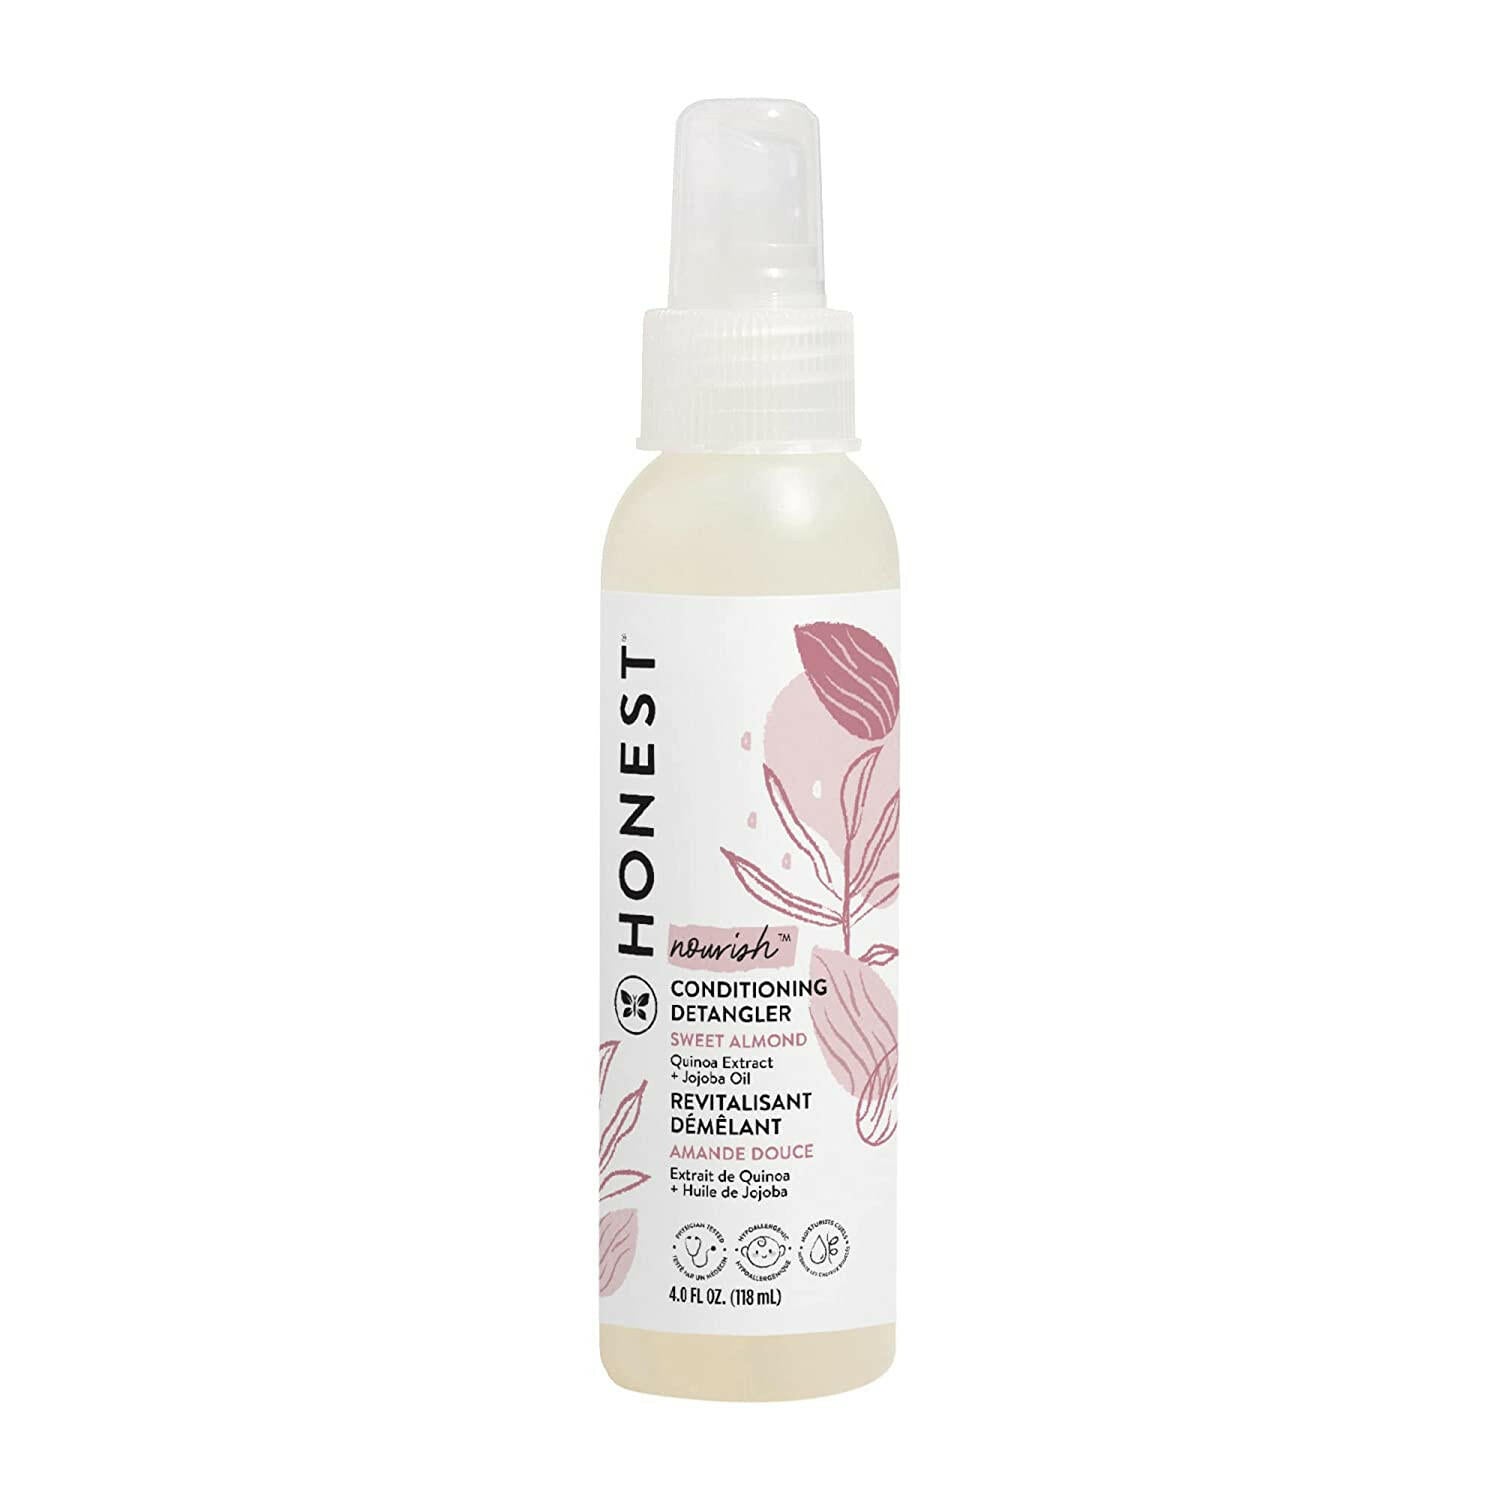 The Honest Company Conditioning Hair Detangler Leave-in Conditioner + Fortifying Spray Tear-free, Cruelty-Free, Hypoallergenic Almond Nourishing 118 ml.